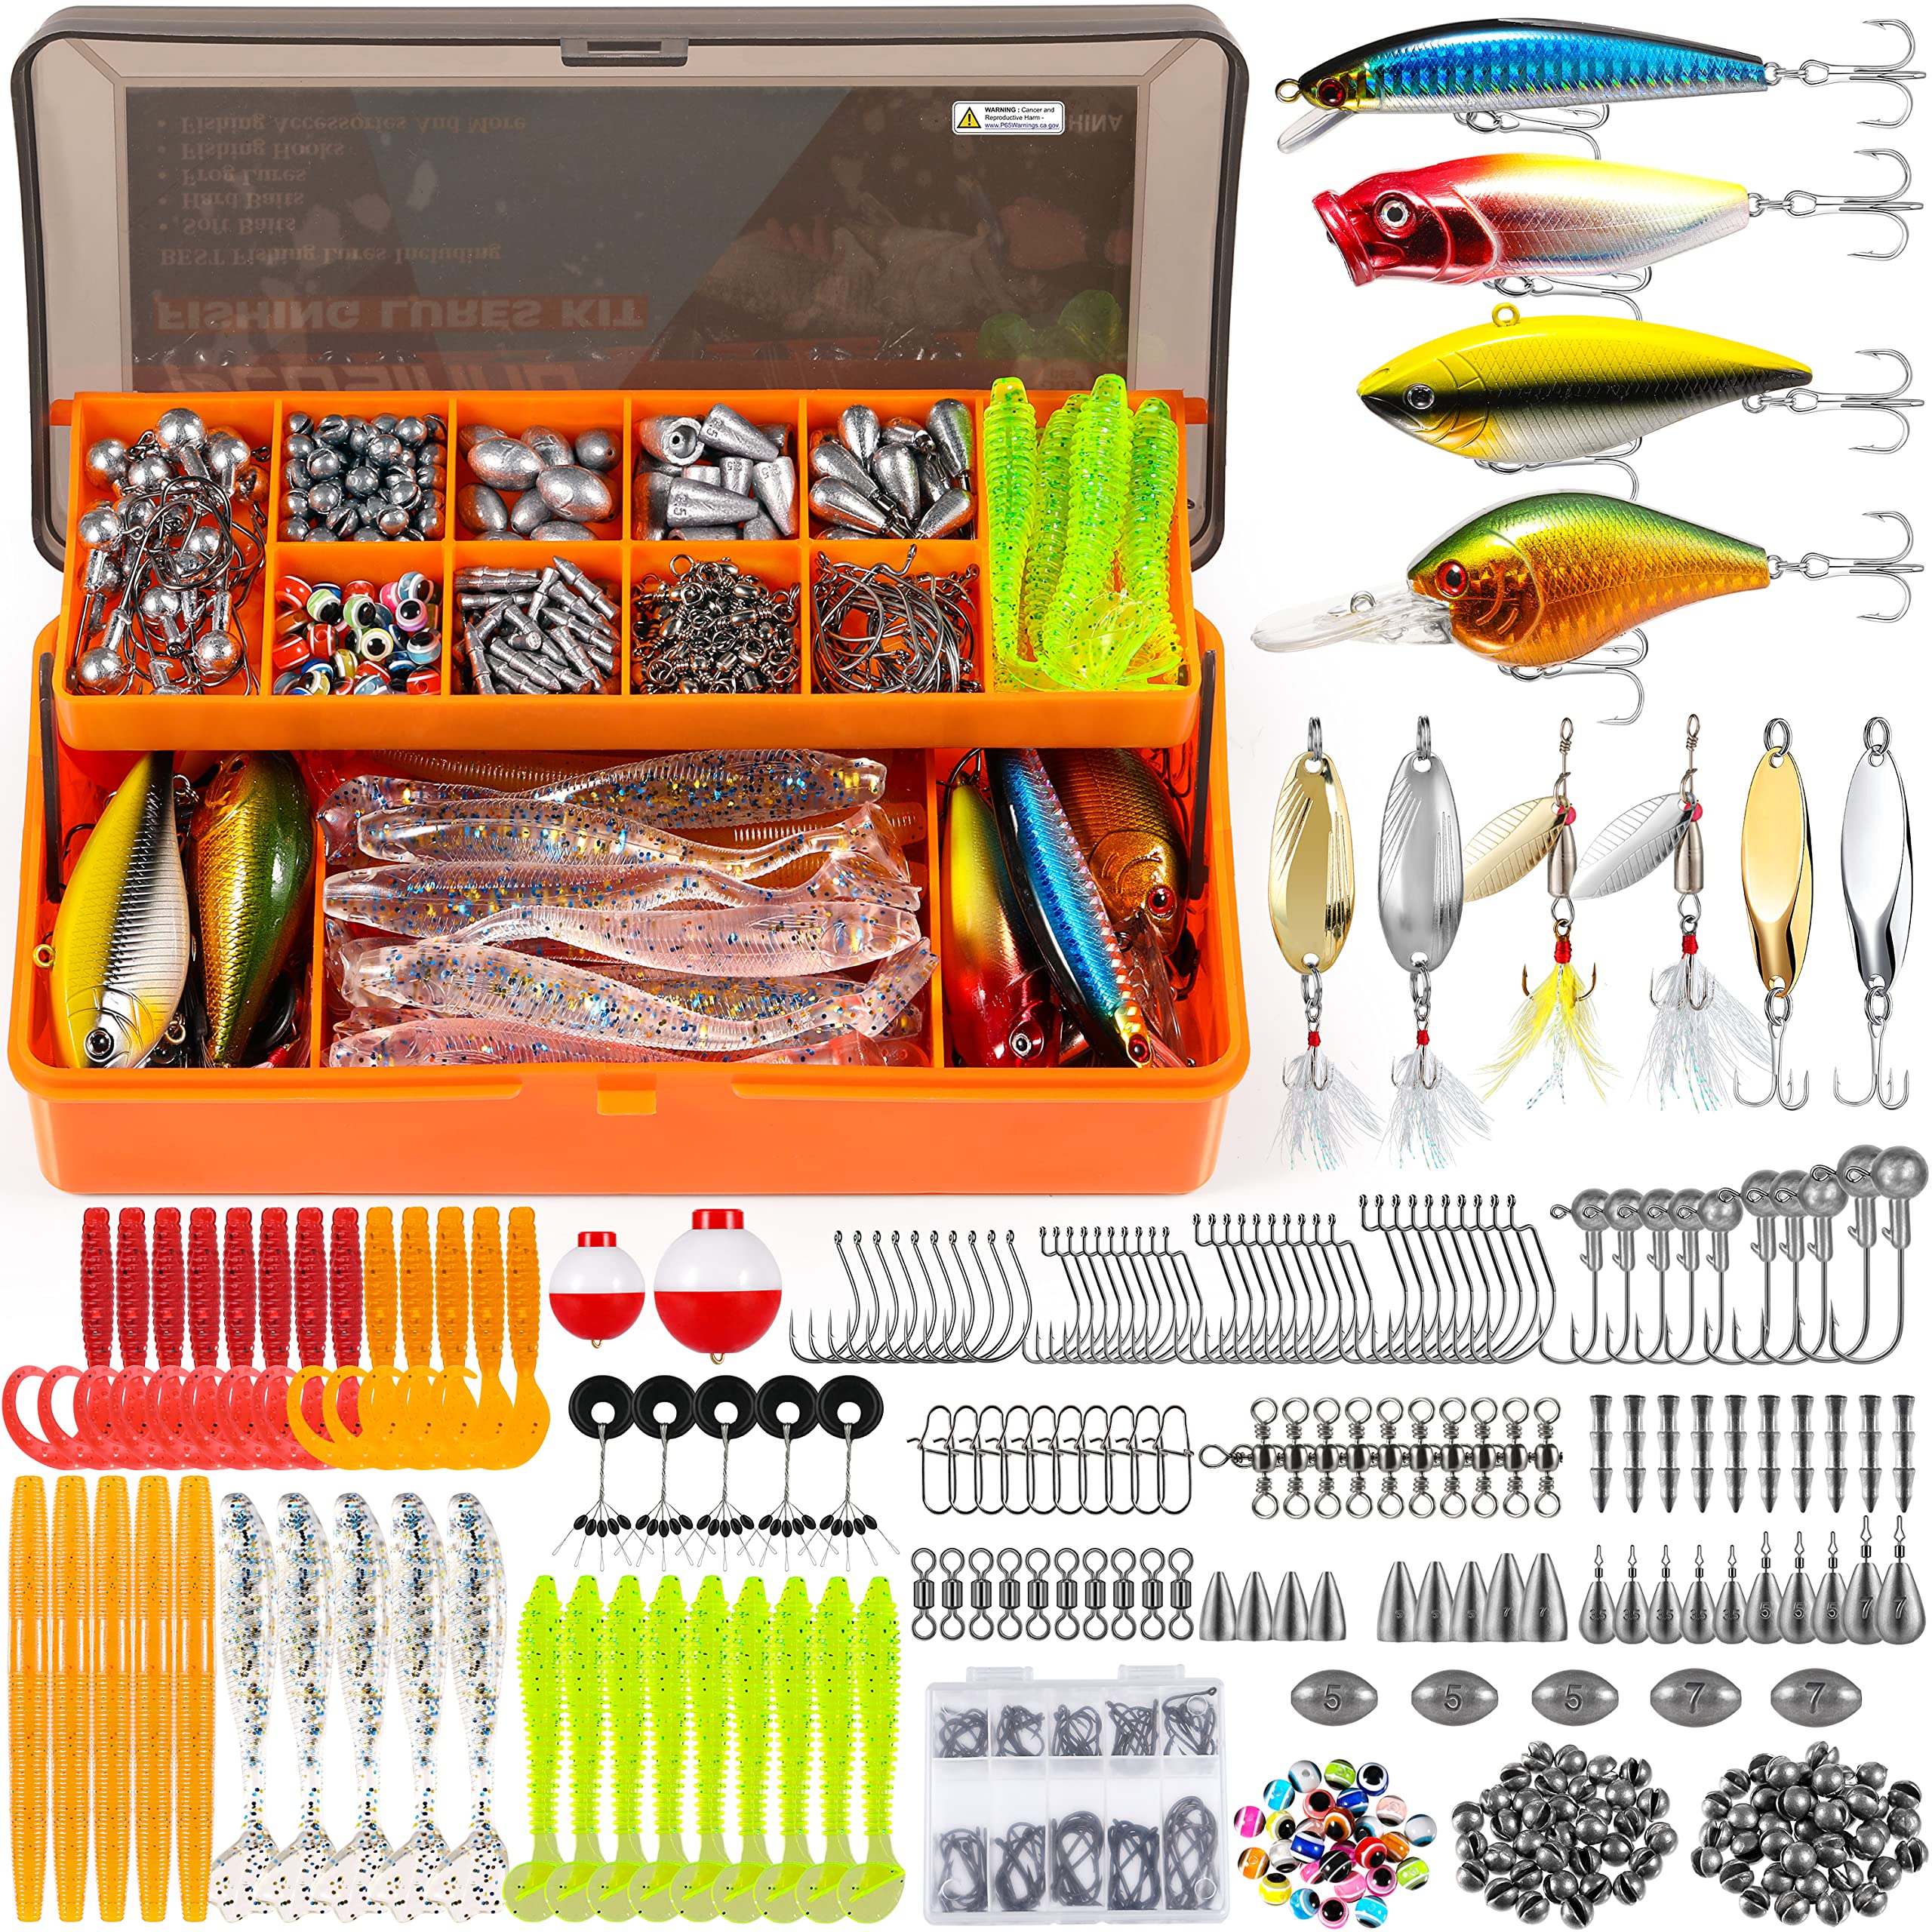 PLUSINNO Fishing Lures for 12 Rigs, Fishing Tackle Box with Tackle Included  Crankbaits, Spoon, Hooks, Weights